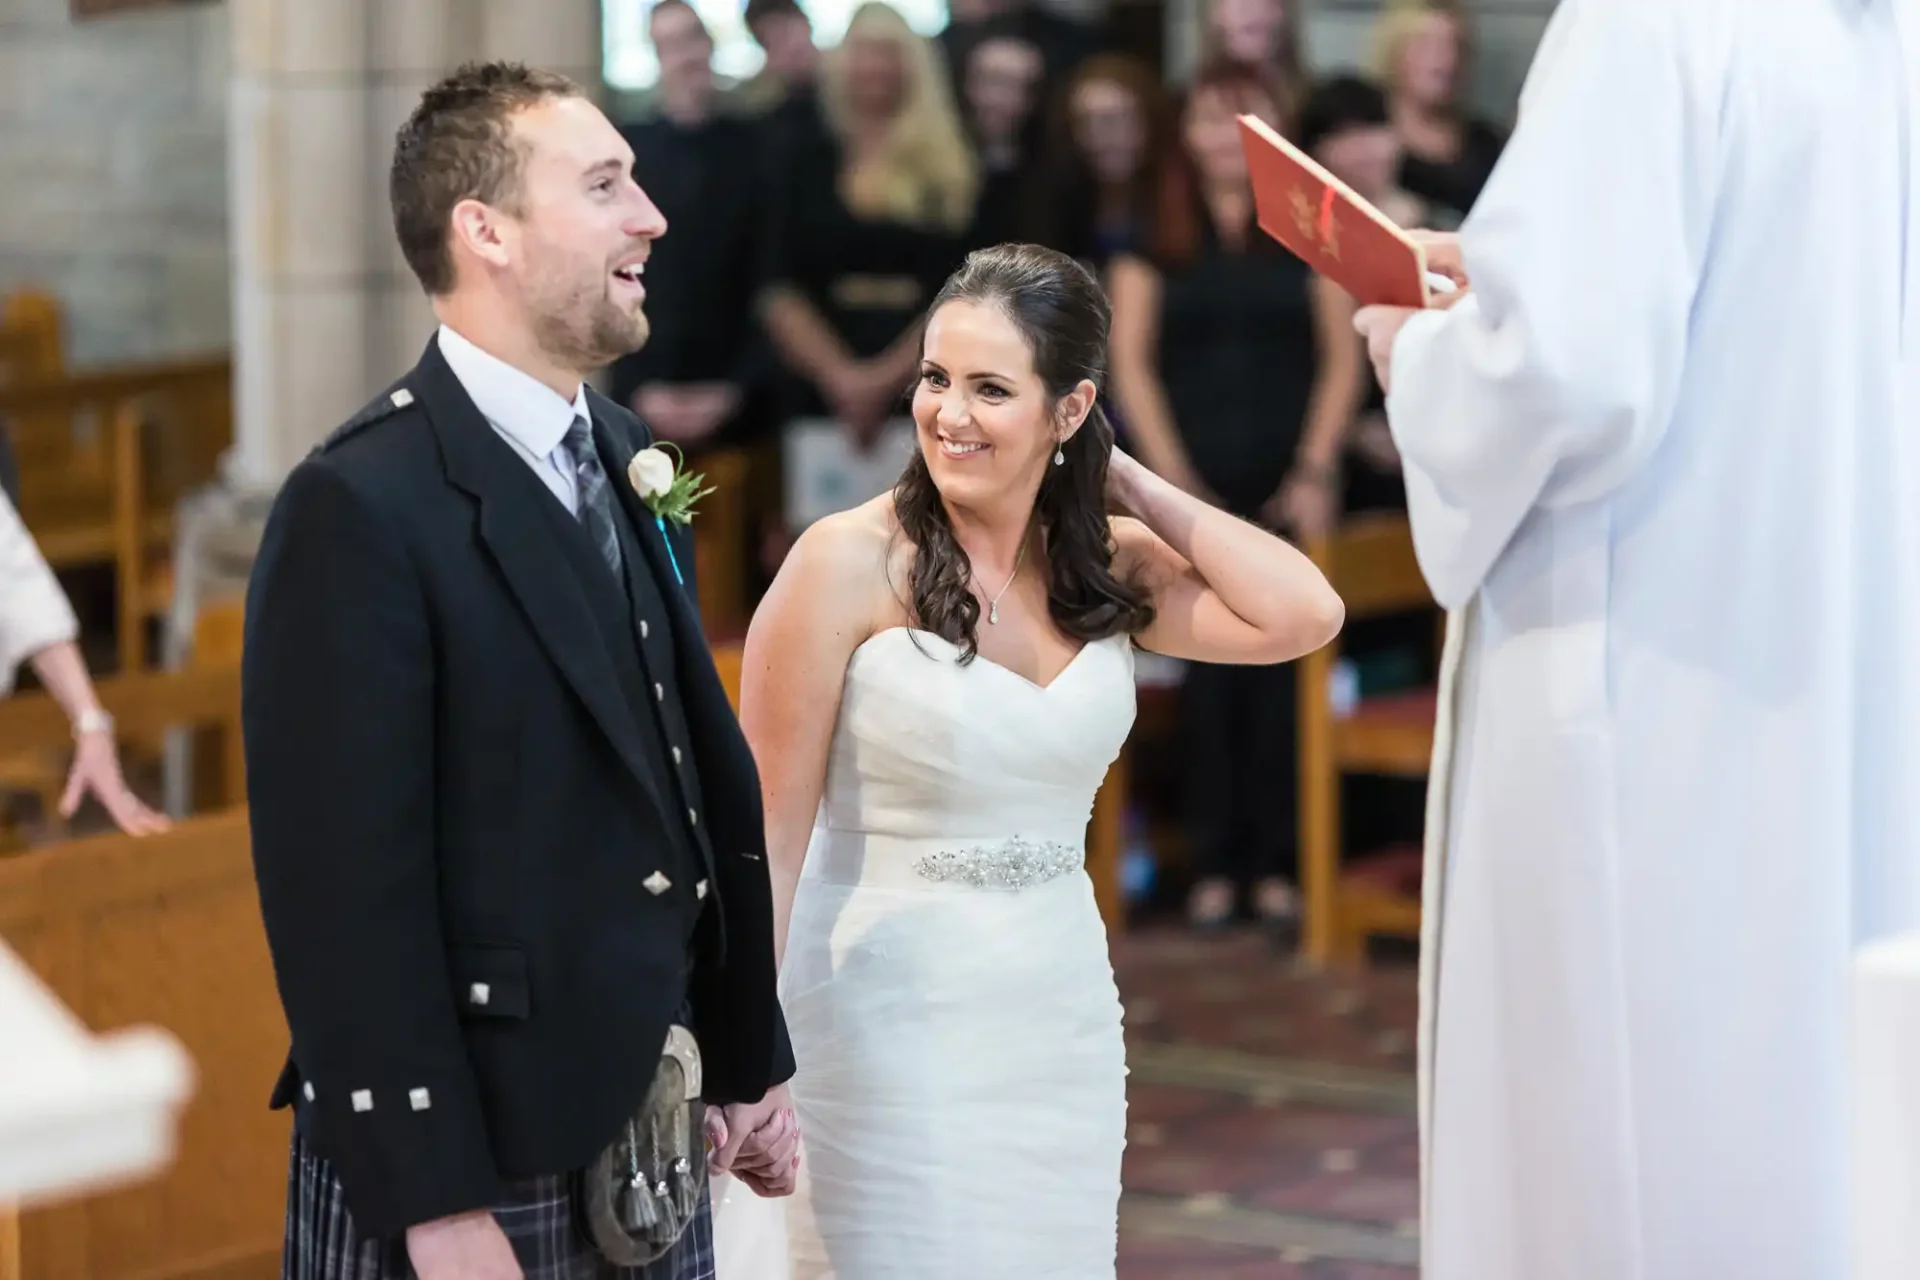 Bride and groom smiling at each other during a wedding ceremony in a church, with a priest leading the ceremony in the foreground.